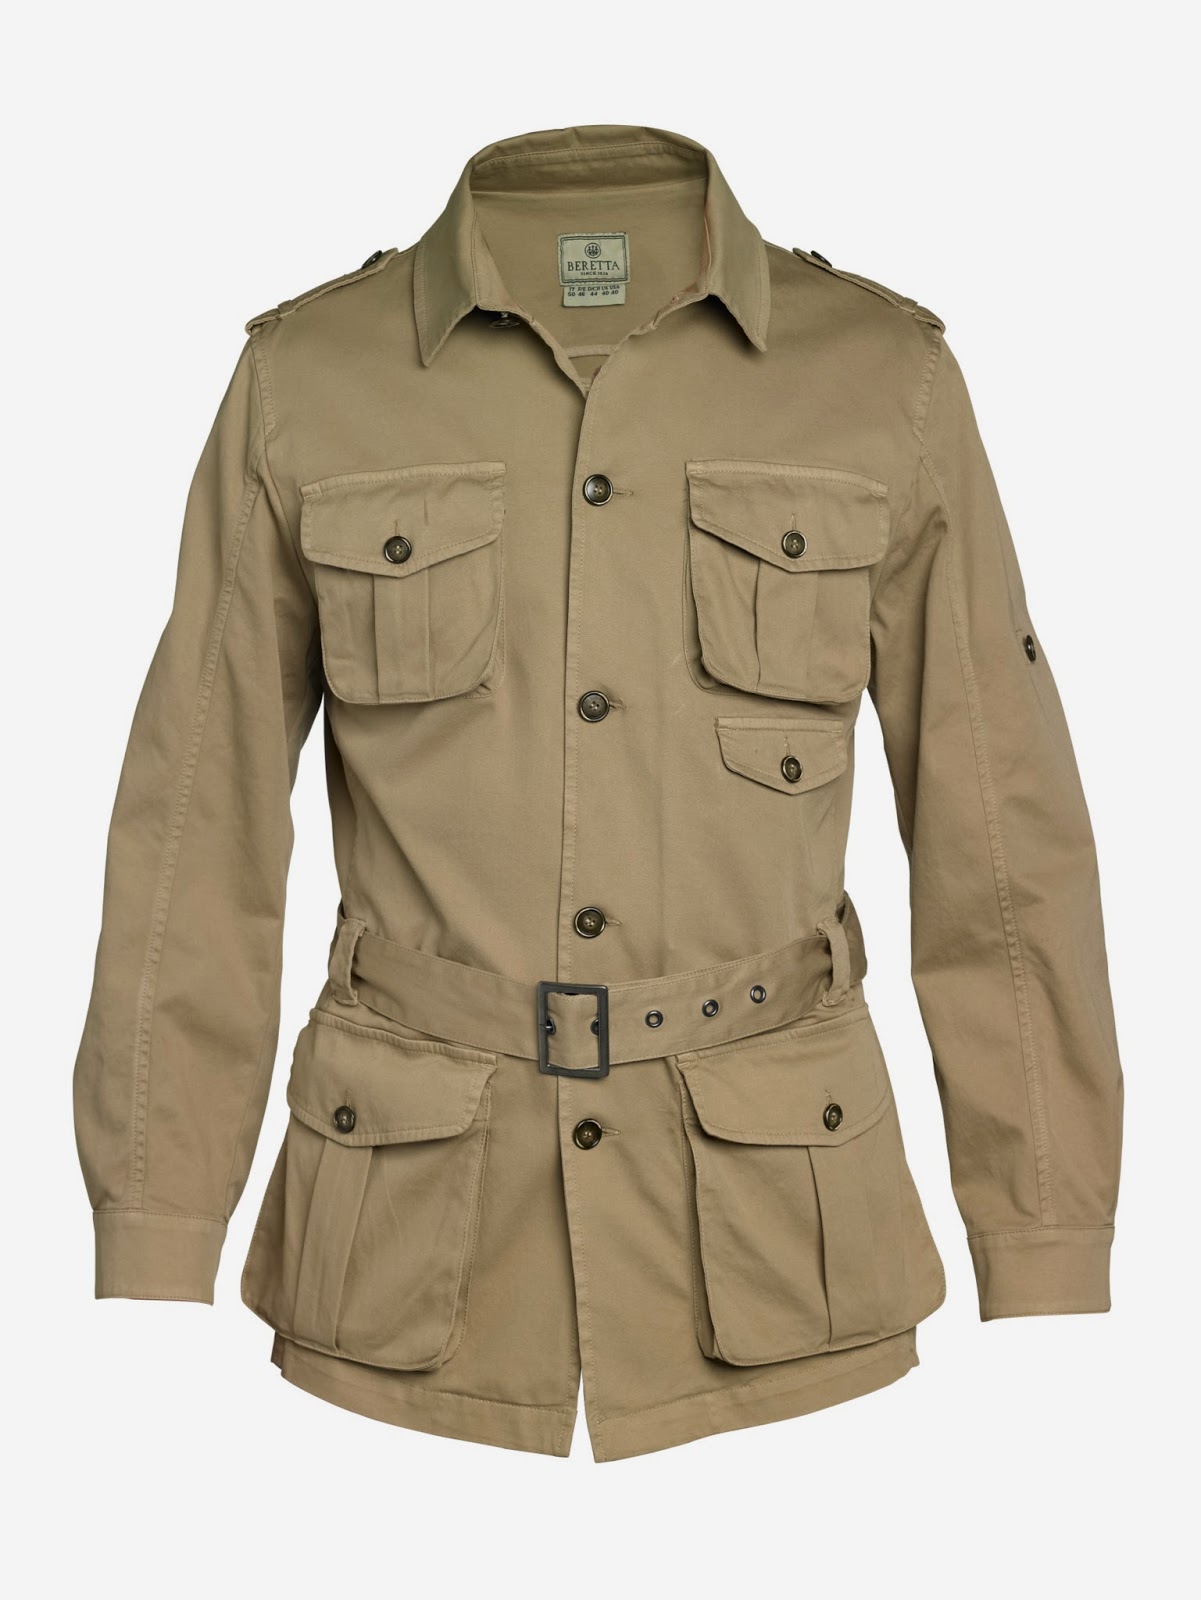 The William Brown Project: THE SAFARI JACKET